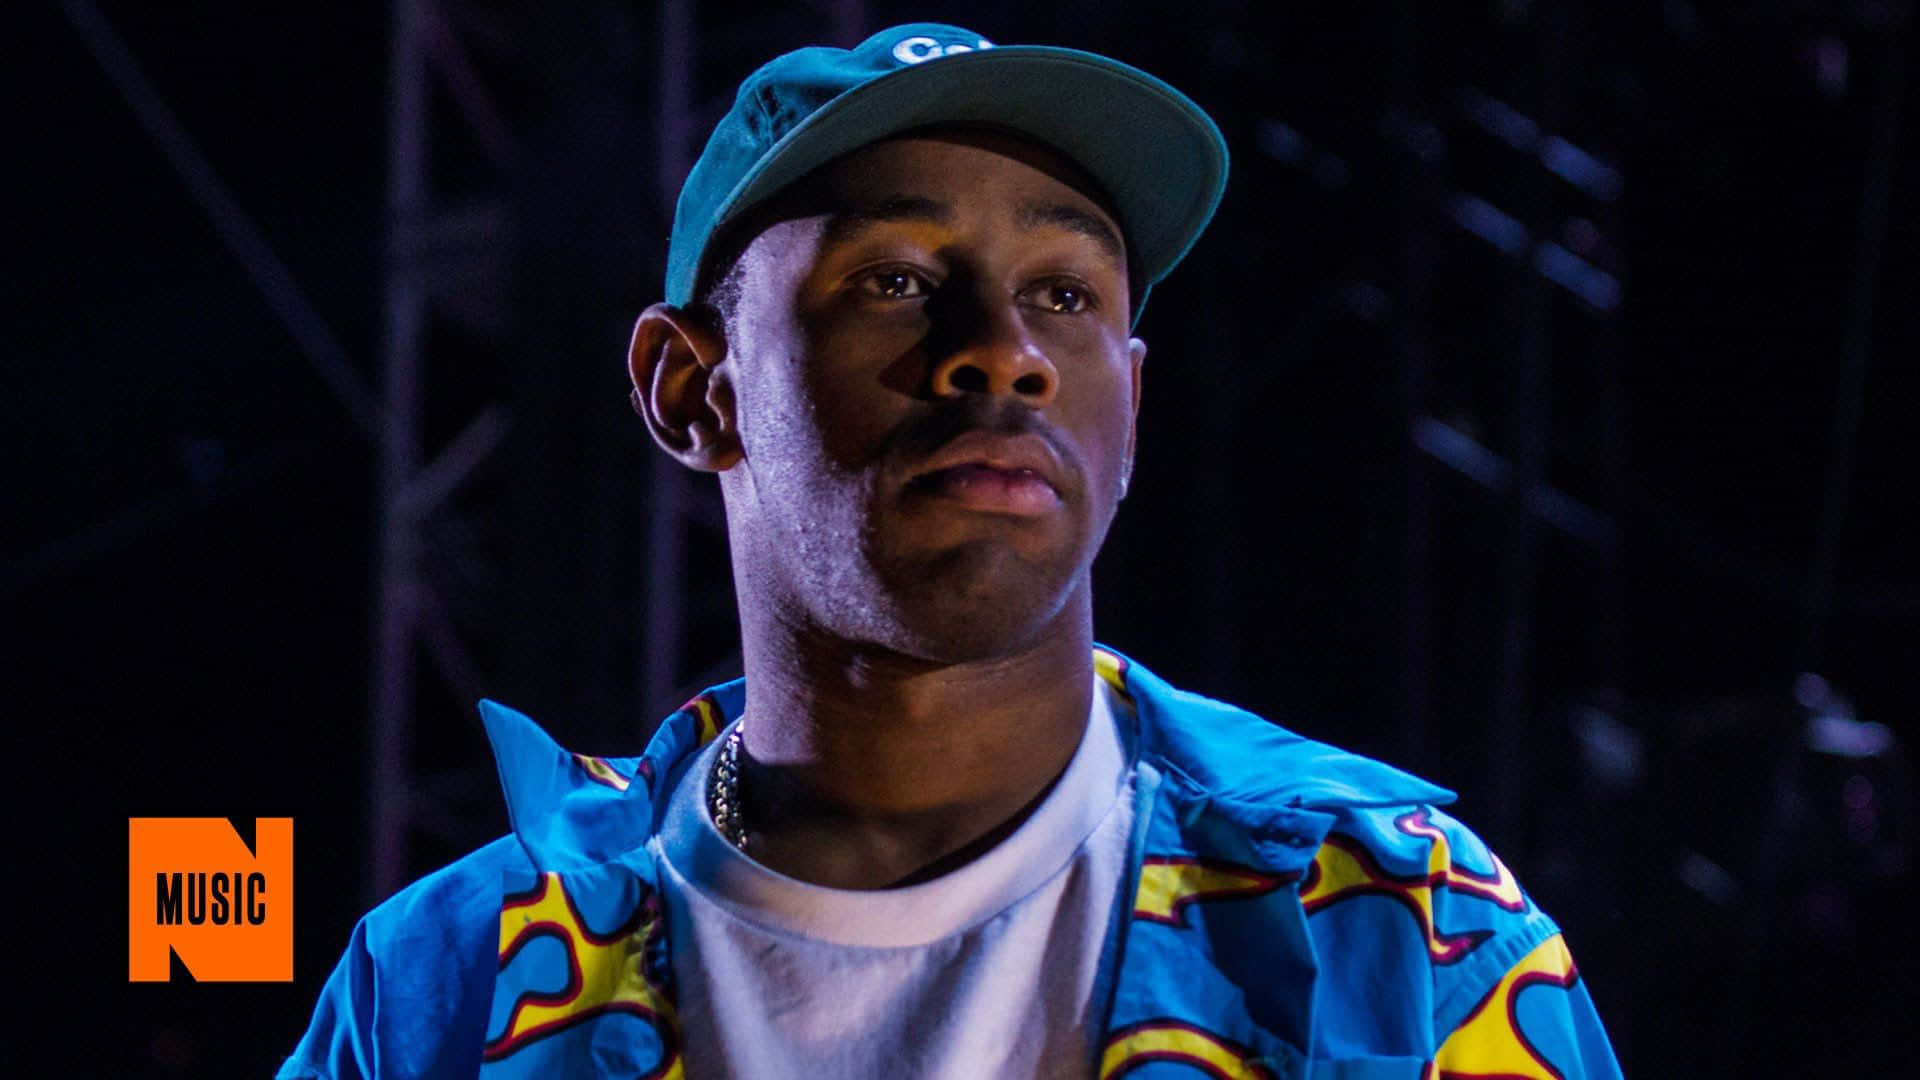 Tyler The Creator on stage at a live show